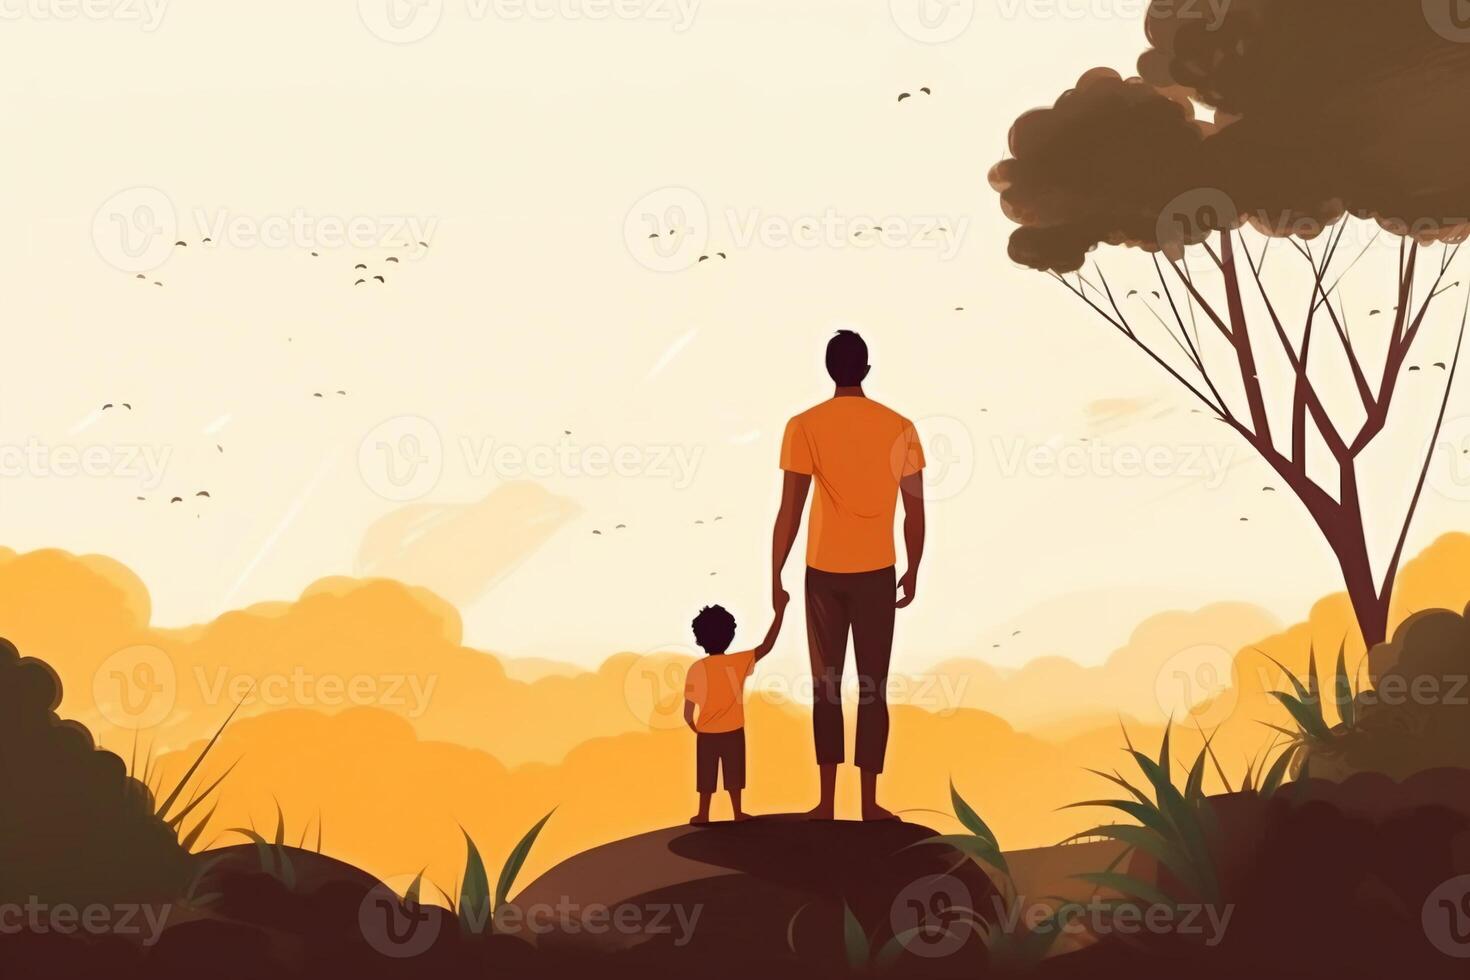 Illustration of father with his little child, tree in the background. Concept of fathers day, fathers love, relationships between father and child. photo